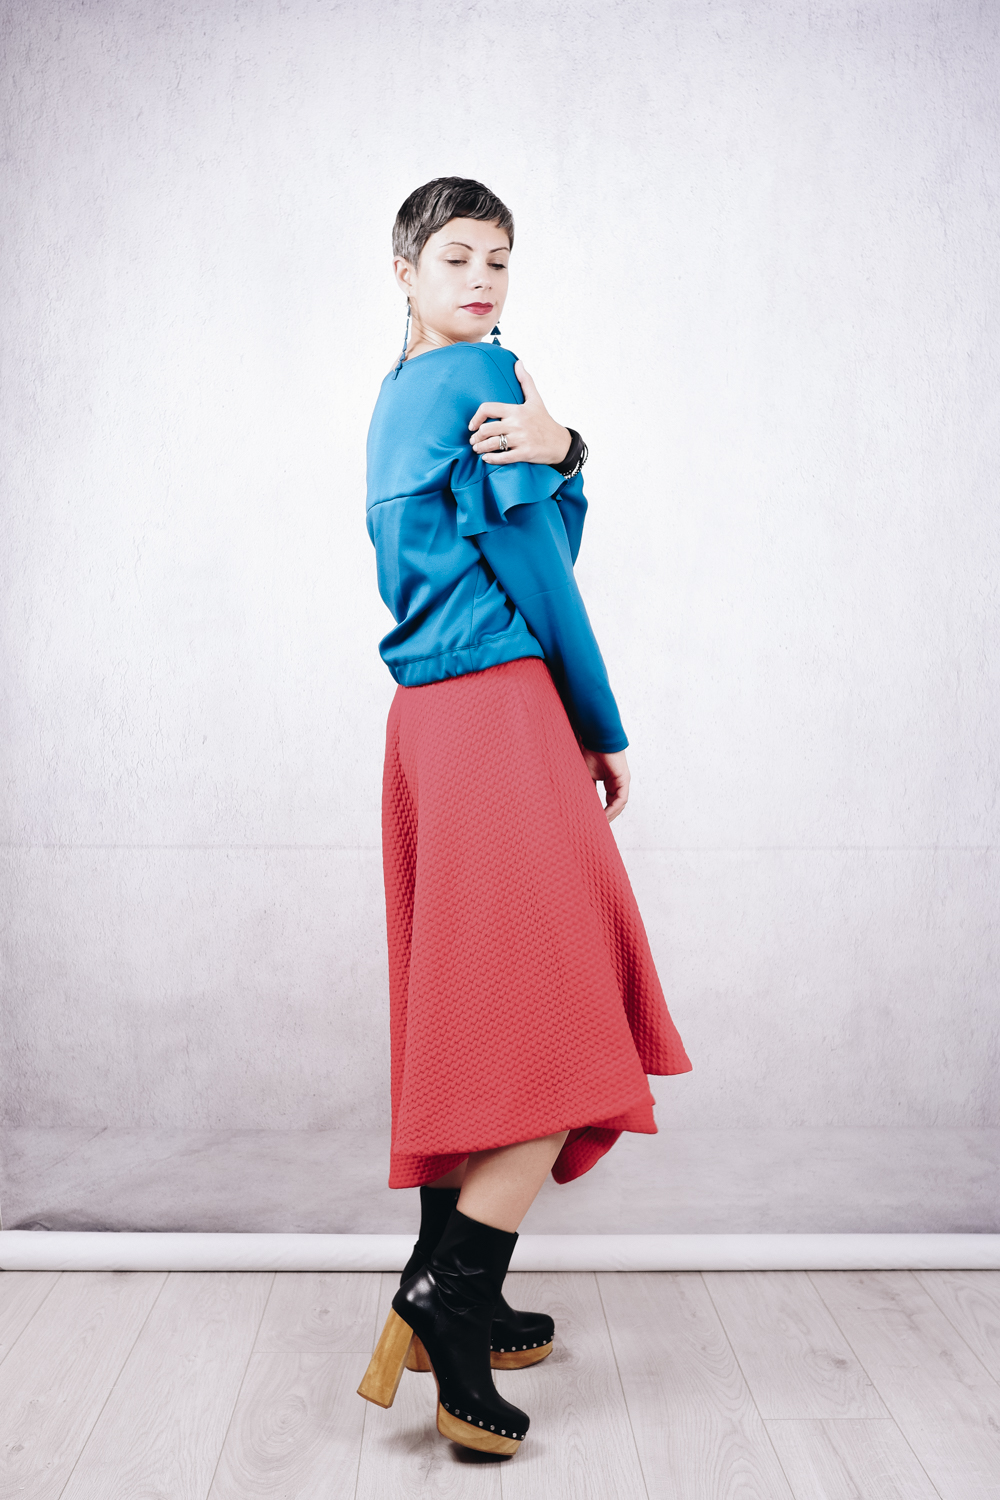 Outfit inspiration: DIY ruffle sleeve scuba sweater, paired with an asymmetric red skirt in textured scuba, wood block heel black leather boots and dangling teal polymer clay earrings.
sewing | diy outfit | styling handmade items